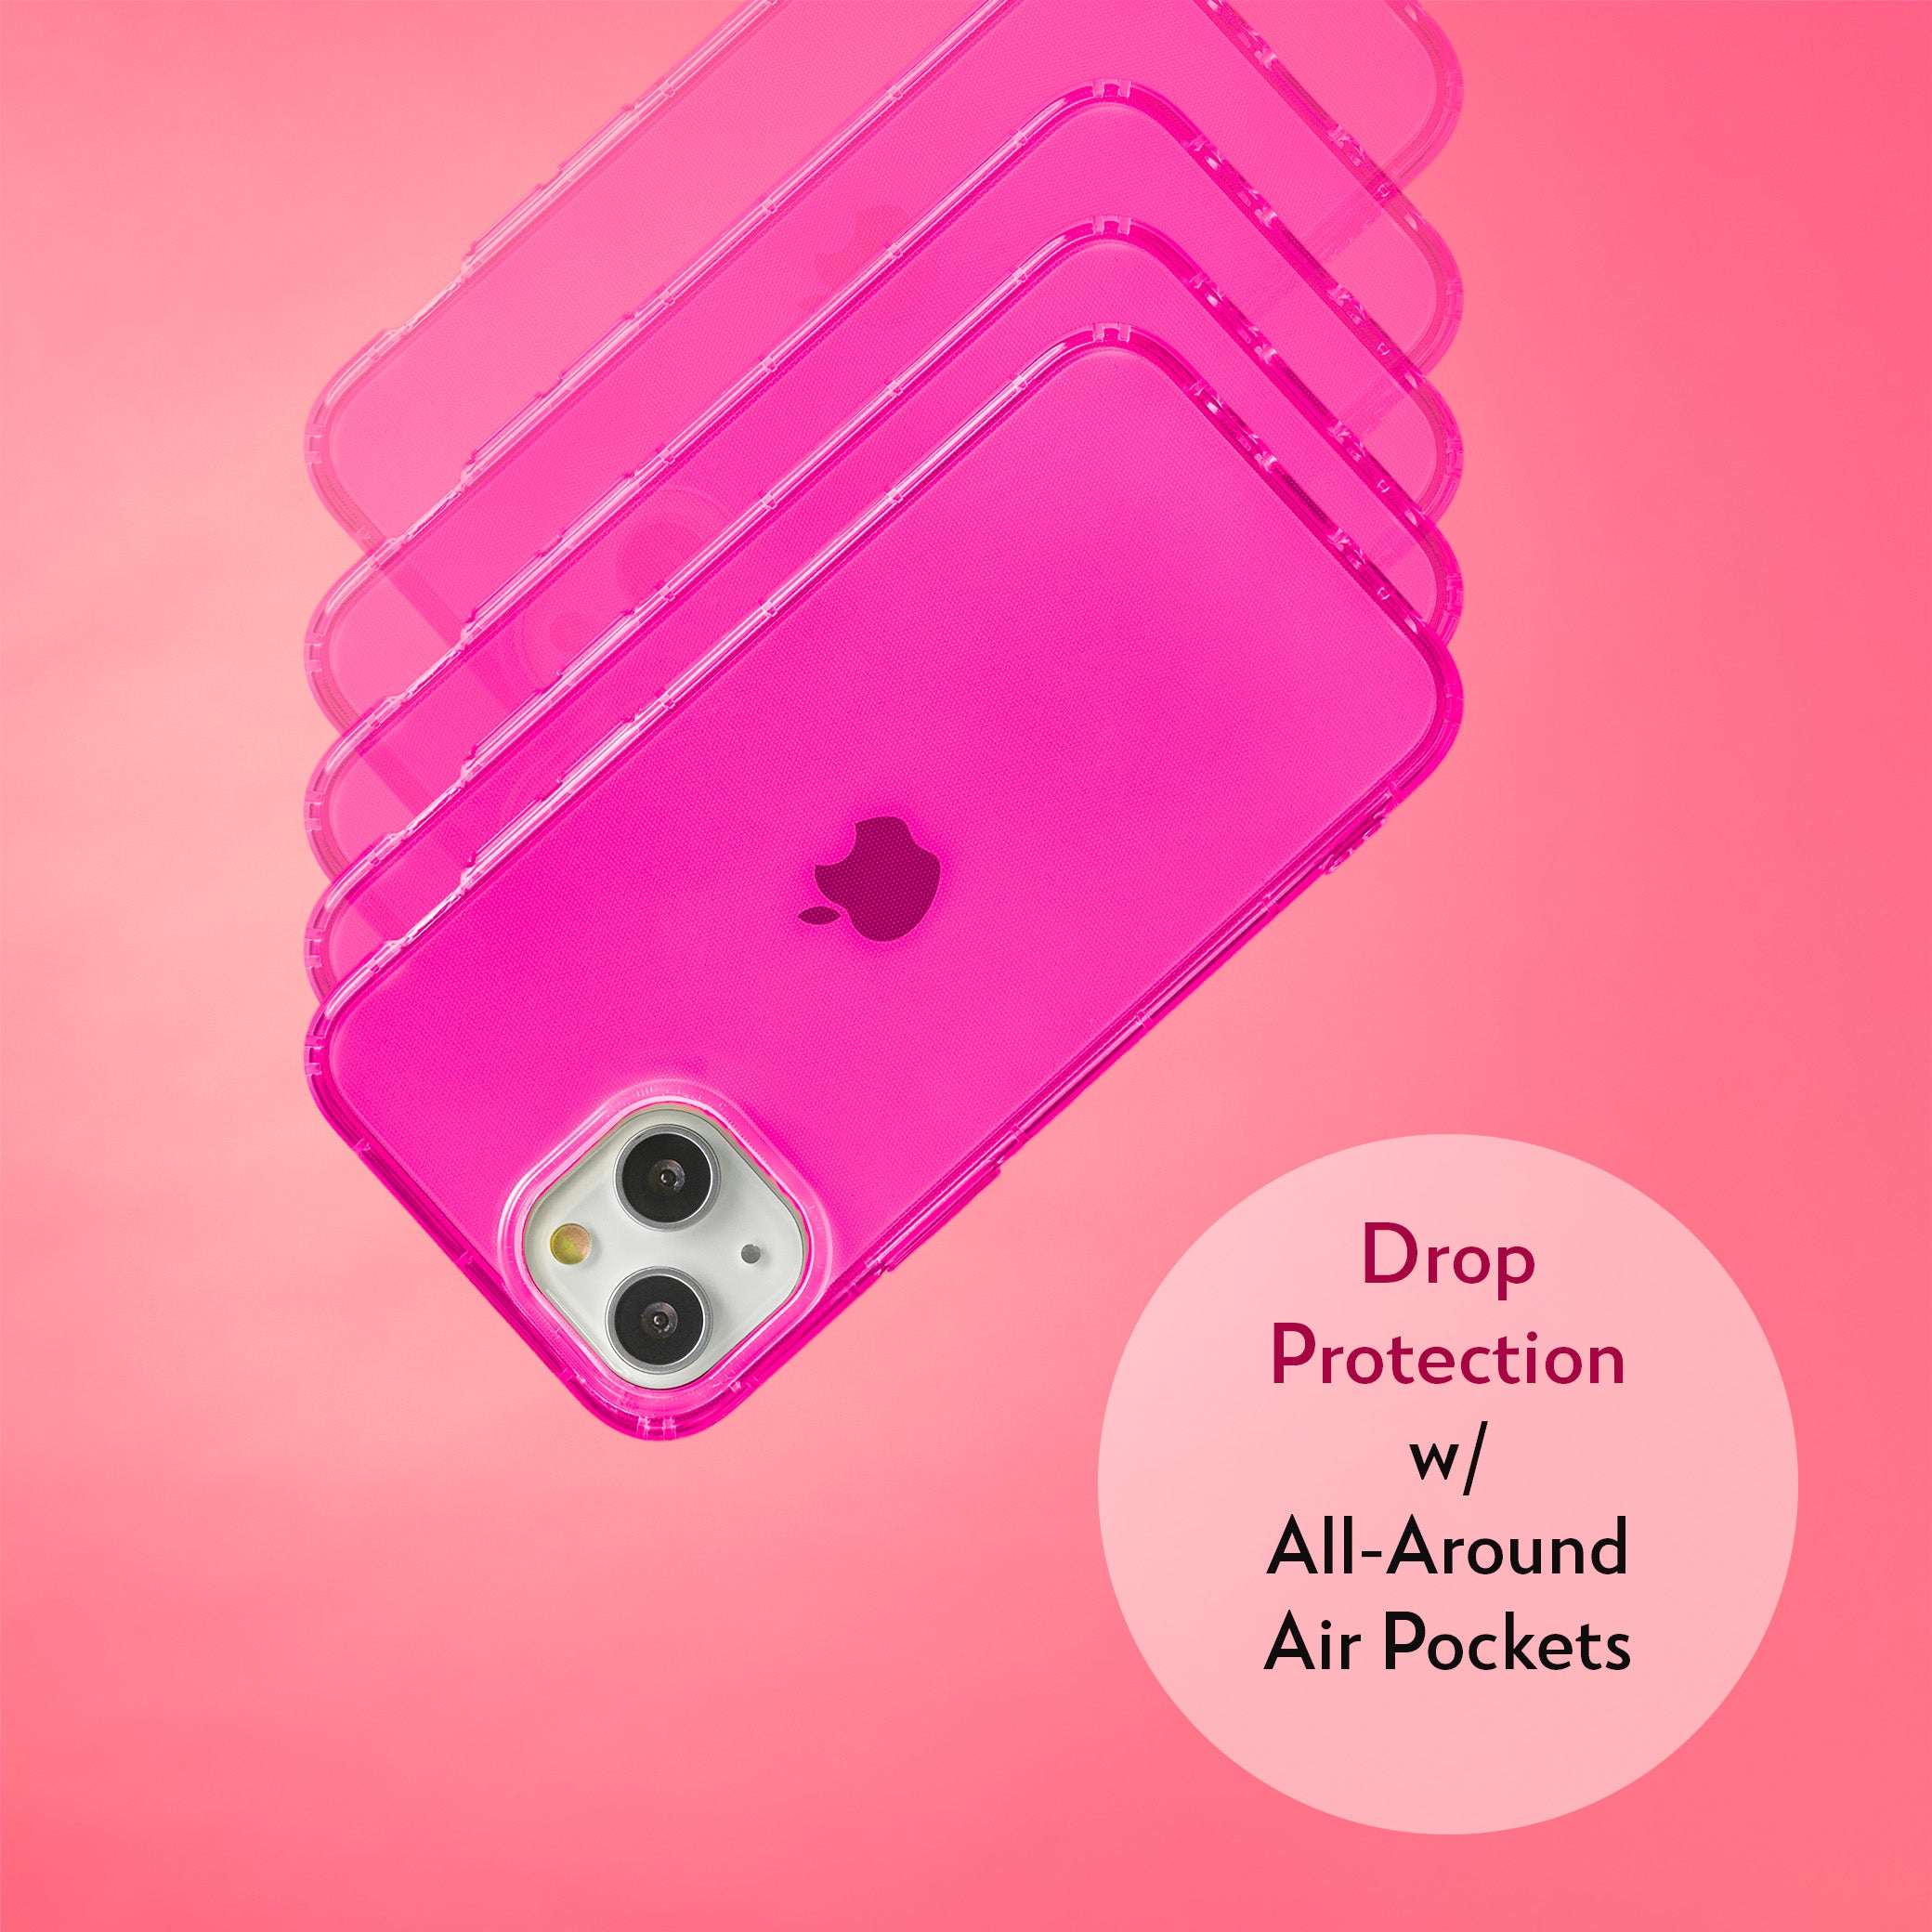 Highlighter Case for iPhone 13 Mini - Eye-Catching Hot Pink